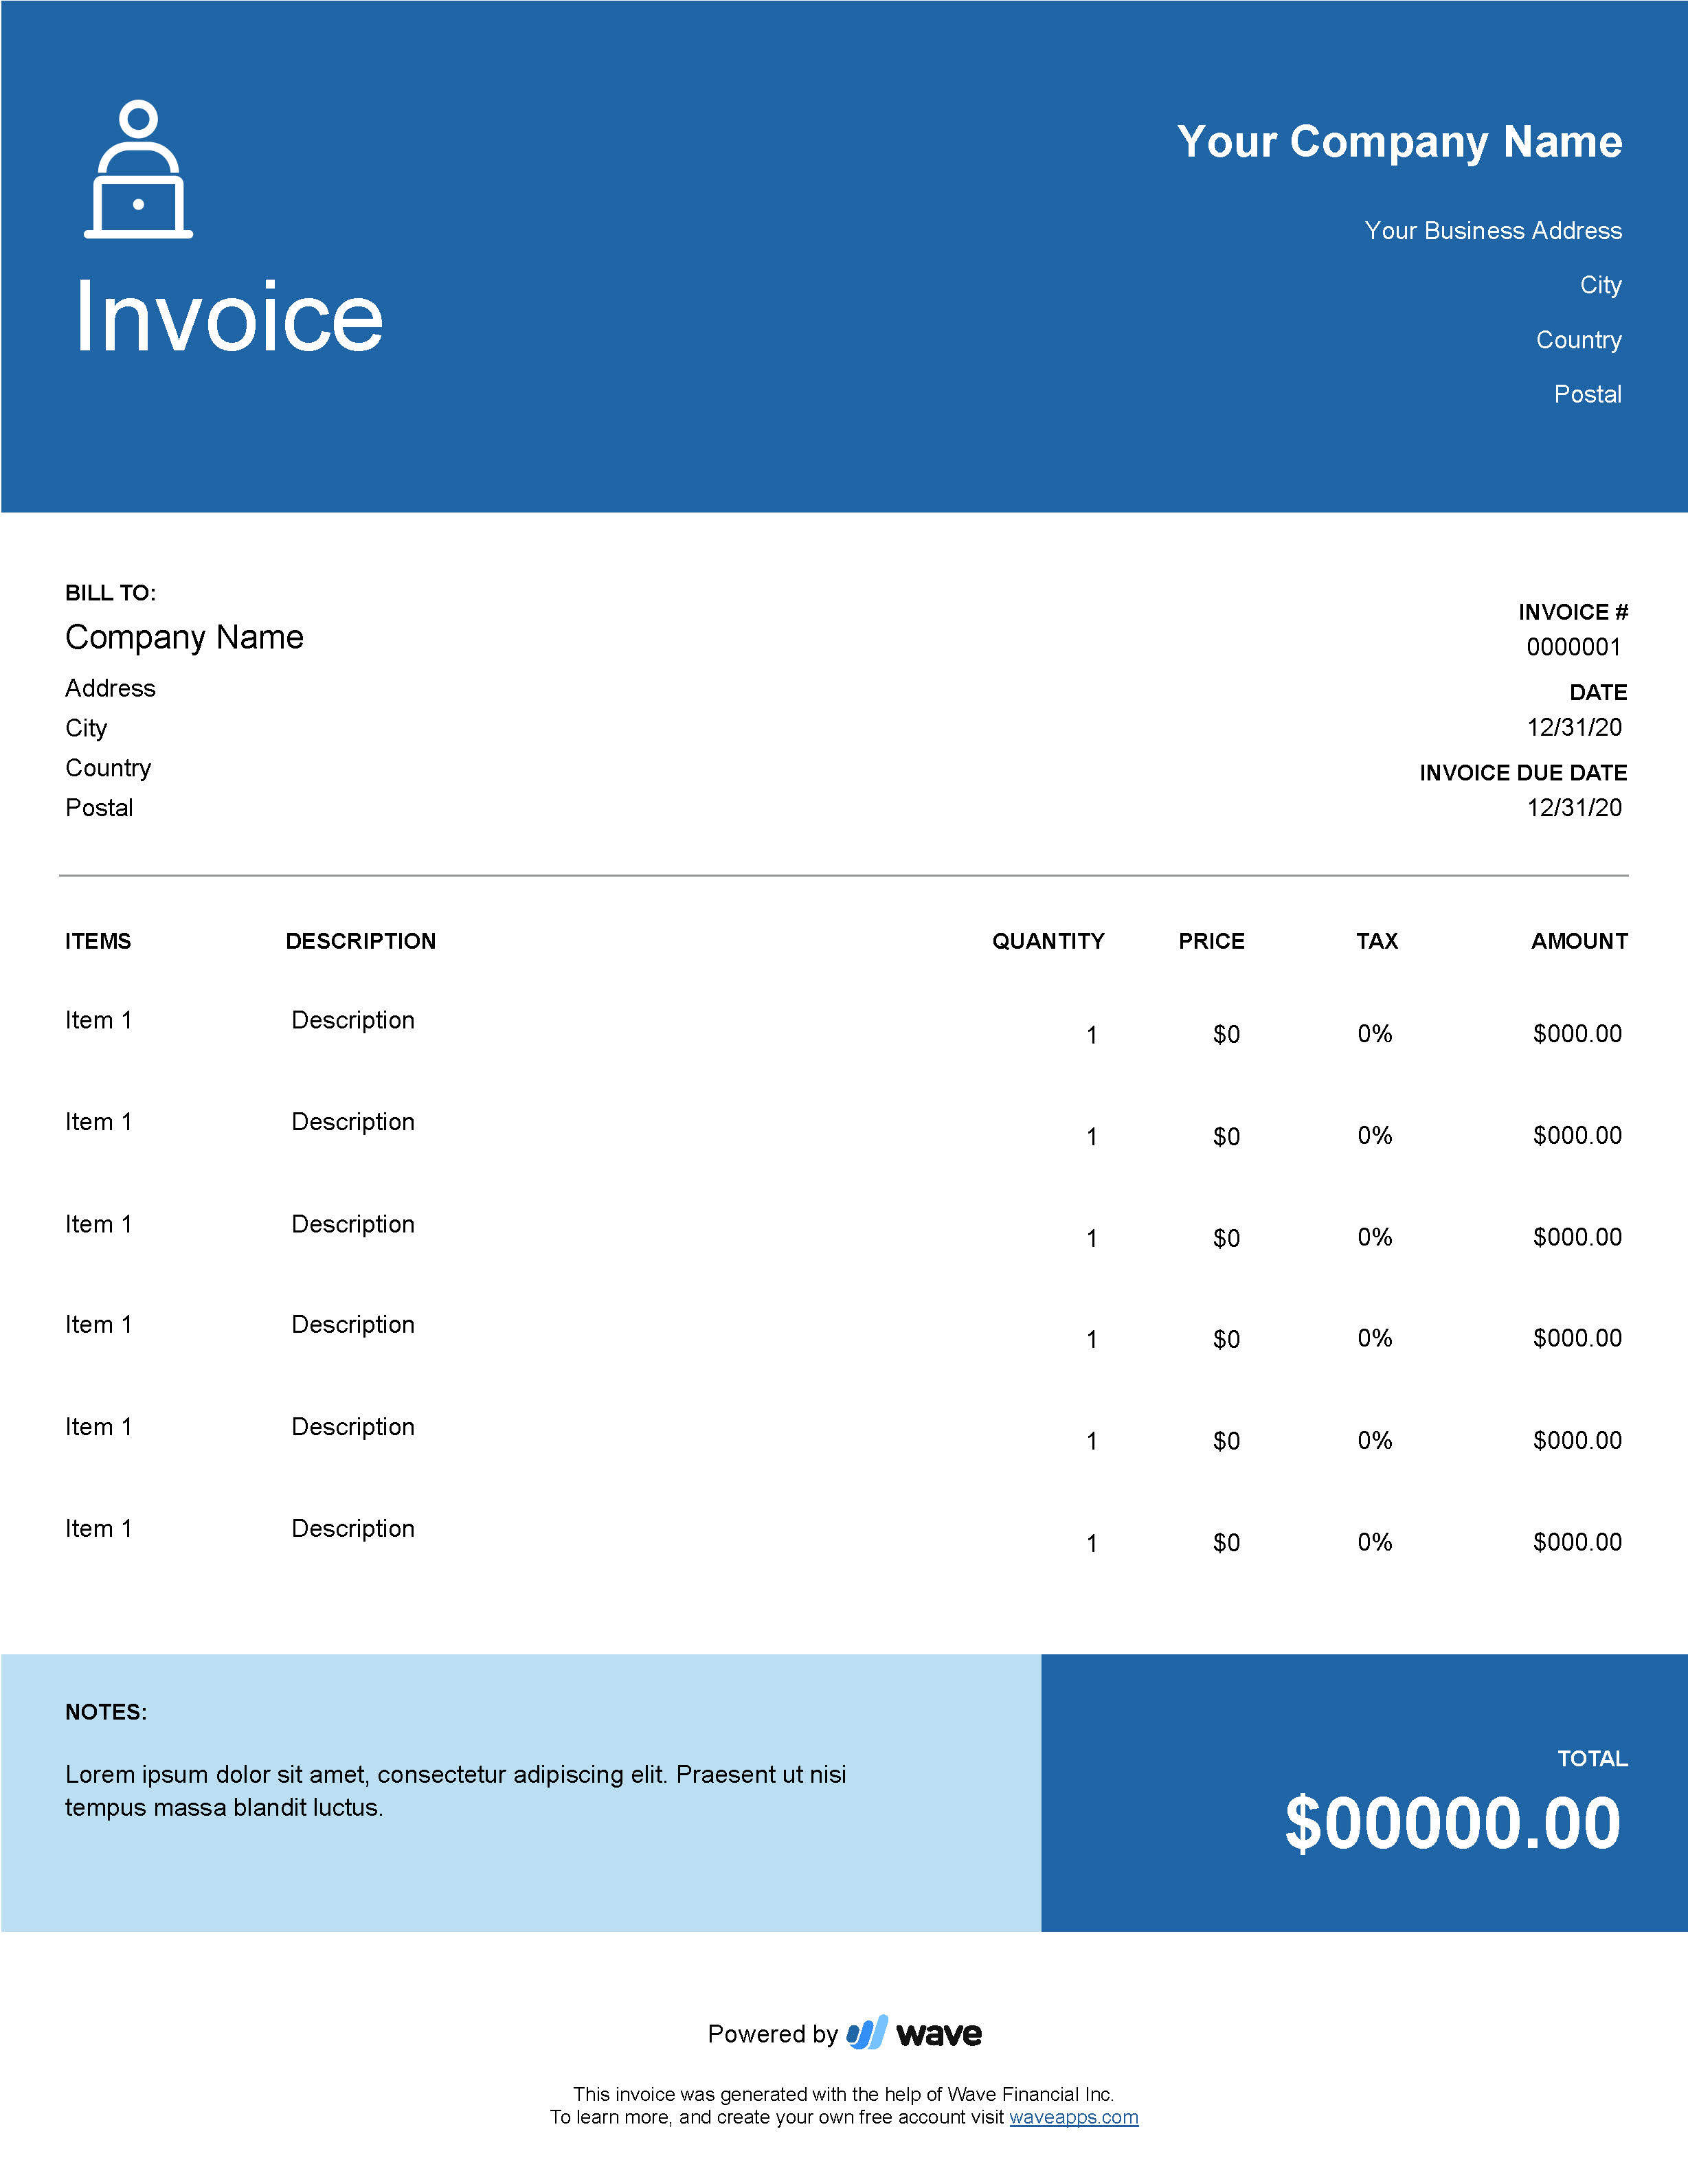 invoice_example.png